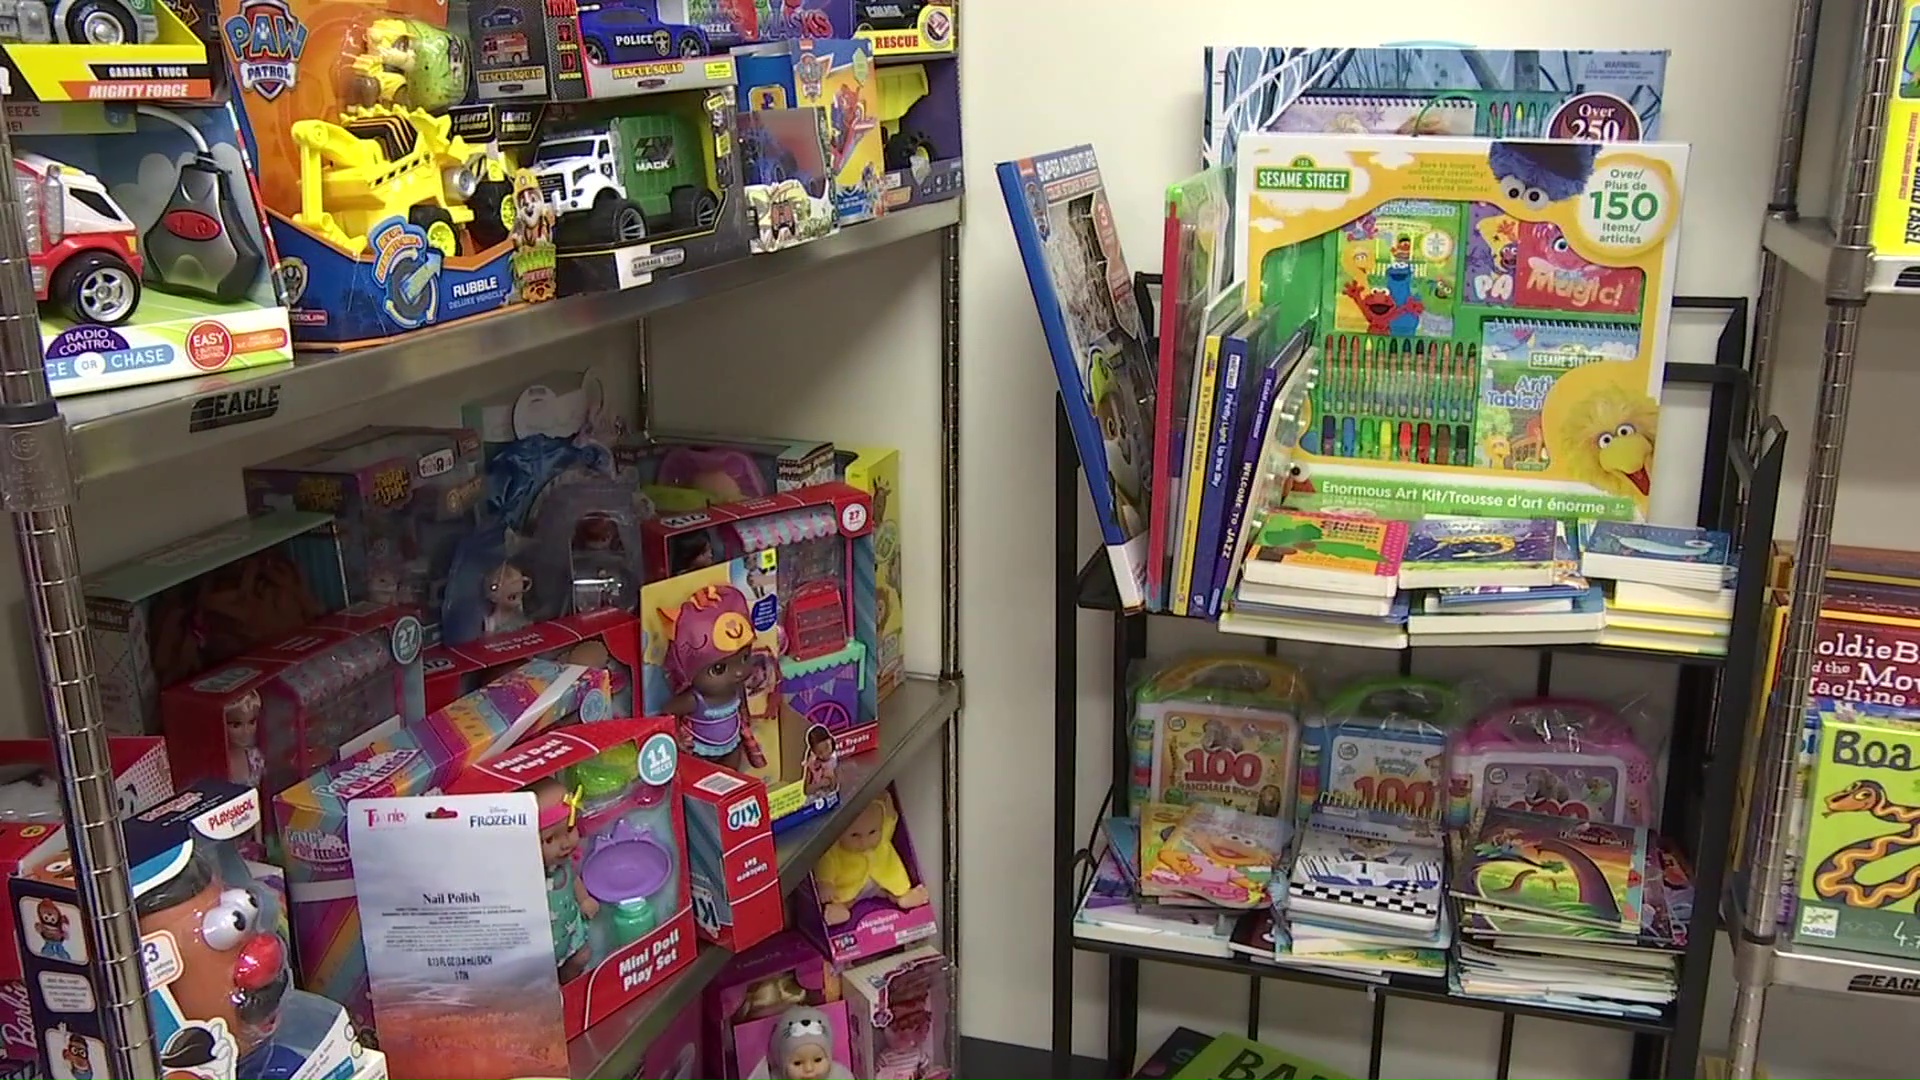 ‘Holiday of Hope' Toy Drive Helps Provide Holiday Gifts for Abused
Children